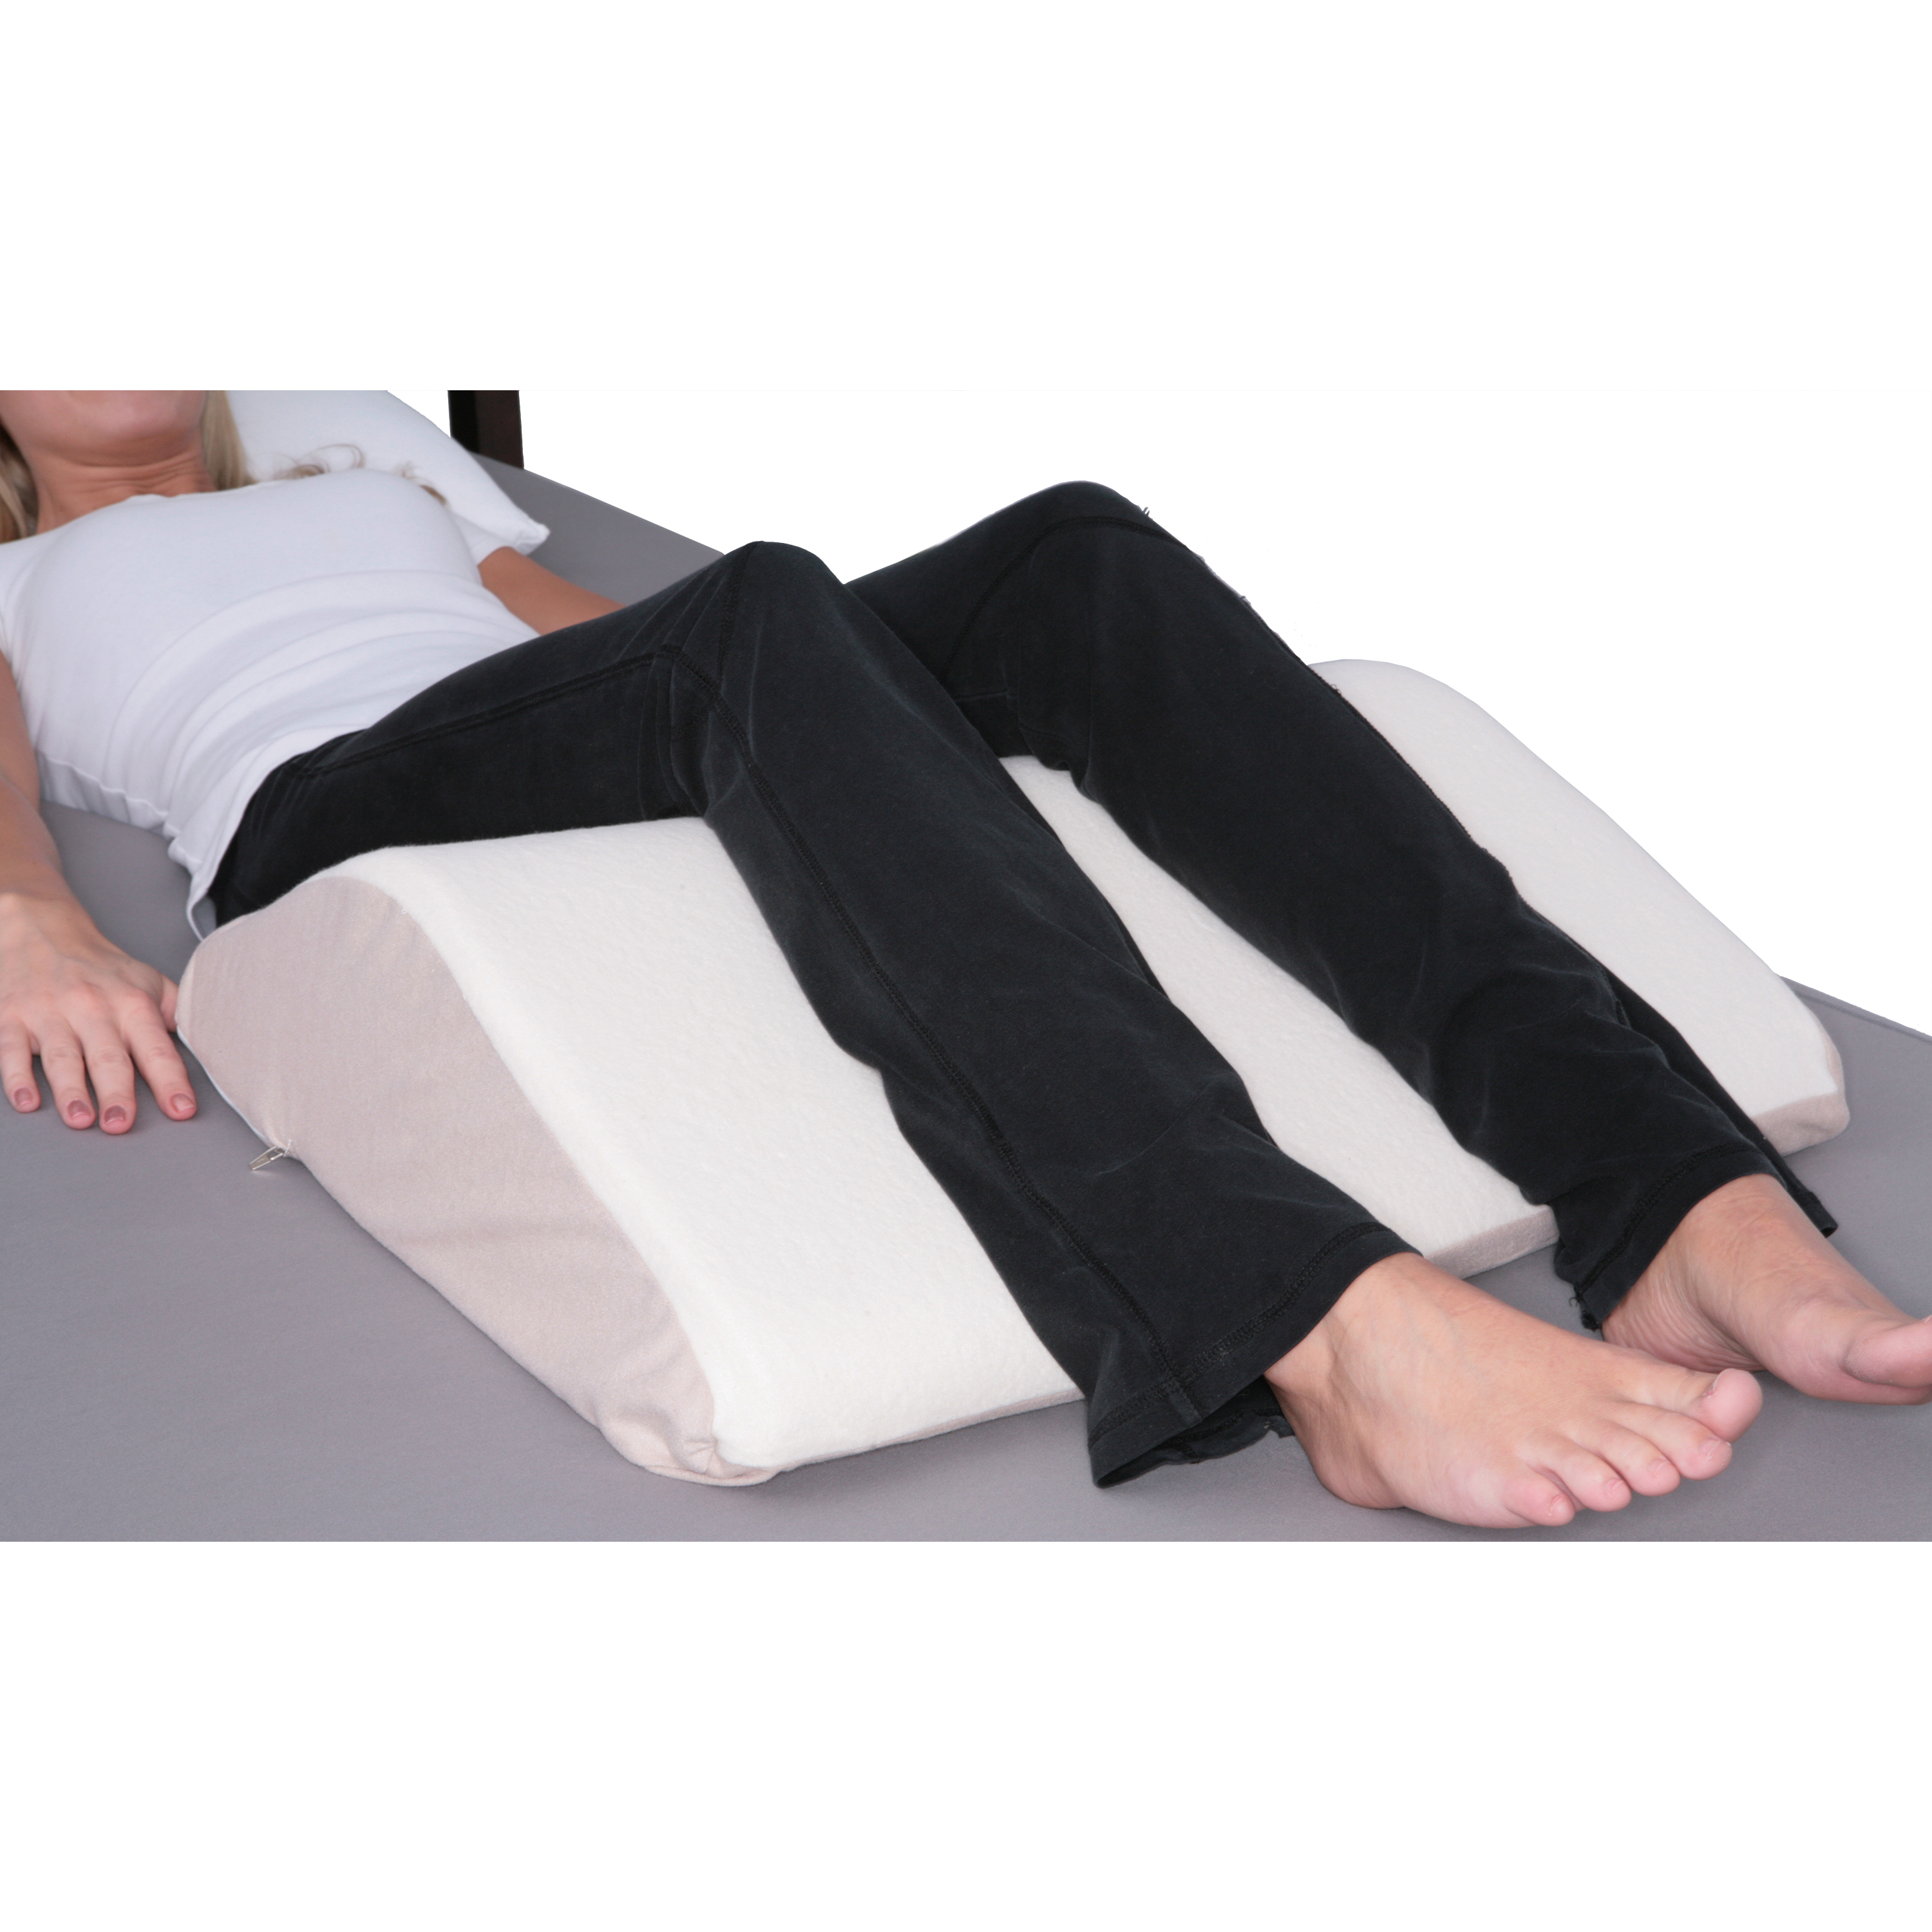 DeluxeComfort Leg Wedge Pillow - Best Memory Foam 2-in-1 Knee Pillows for  Sleeping and Support for Legs